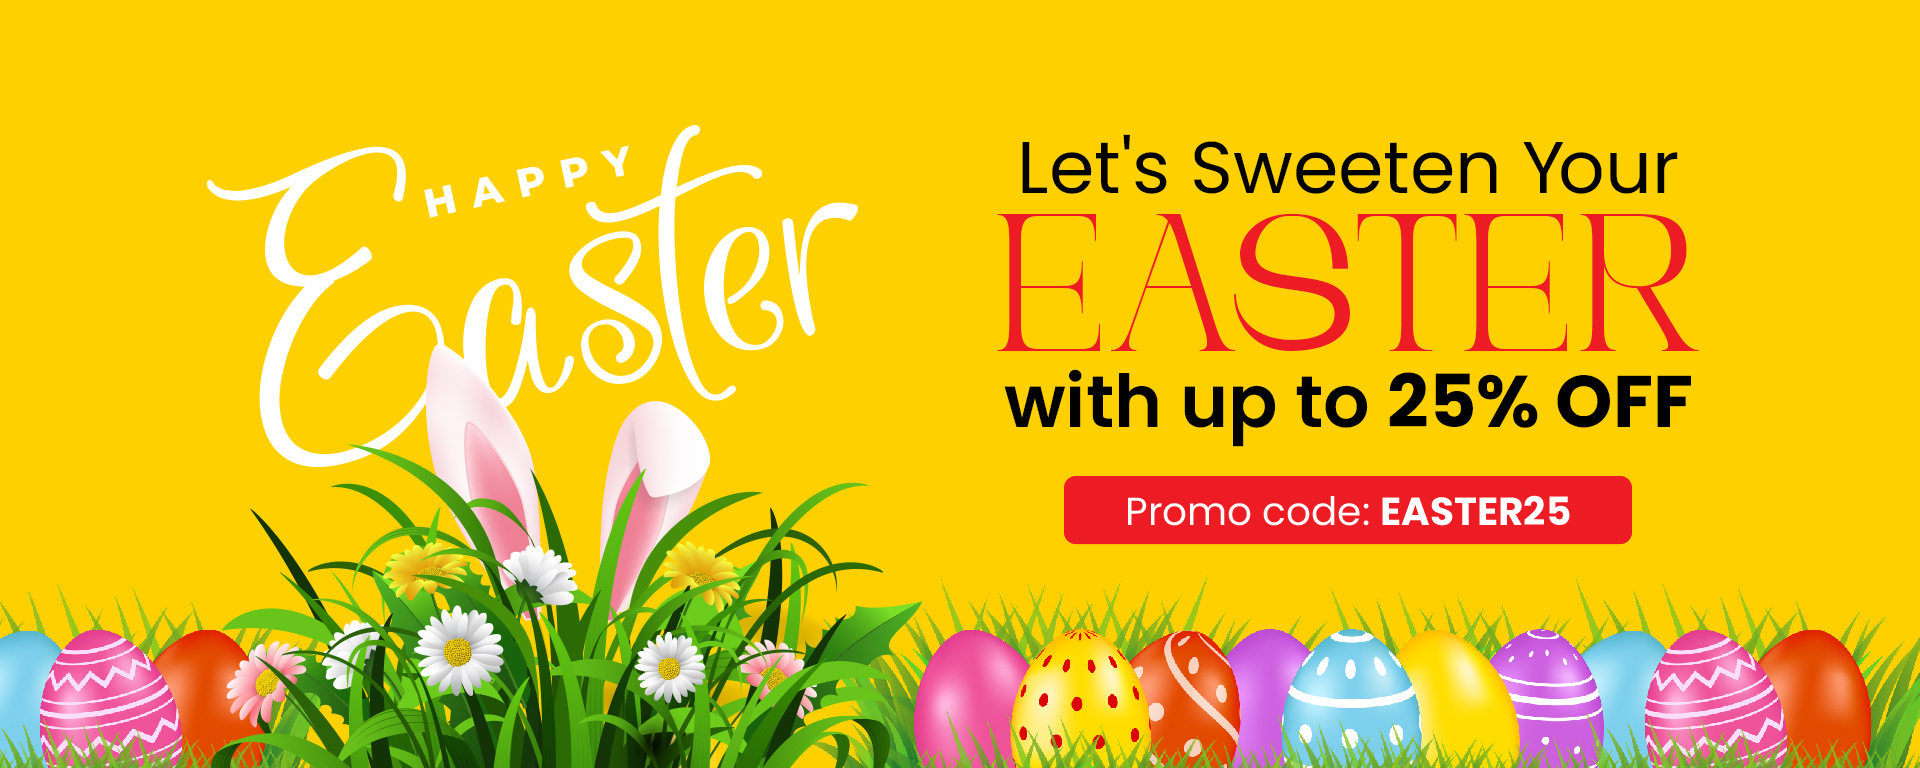 Happy Easter Web Banner (Size 1920 x 768)